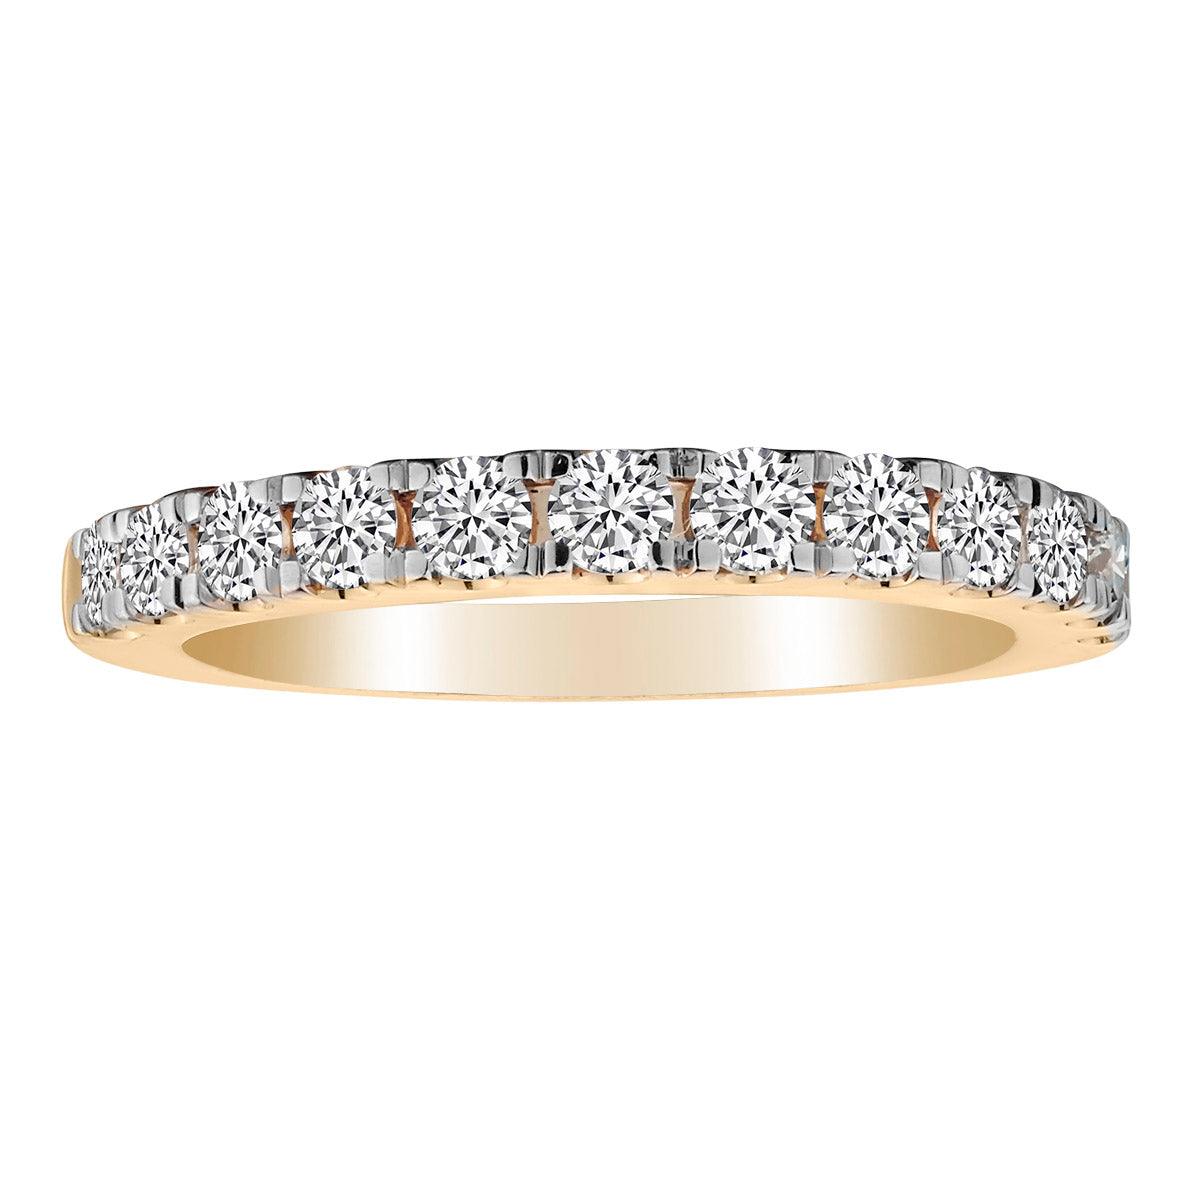 .75 Carat of Diamonds Luxury Band Ring, 14kt Yellow Gold......................NOW